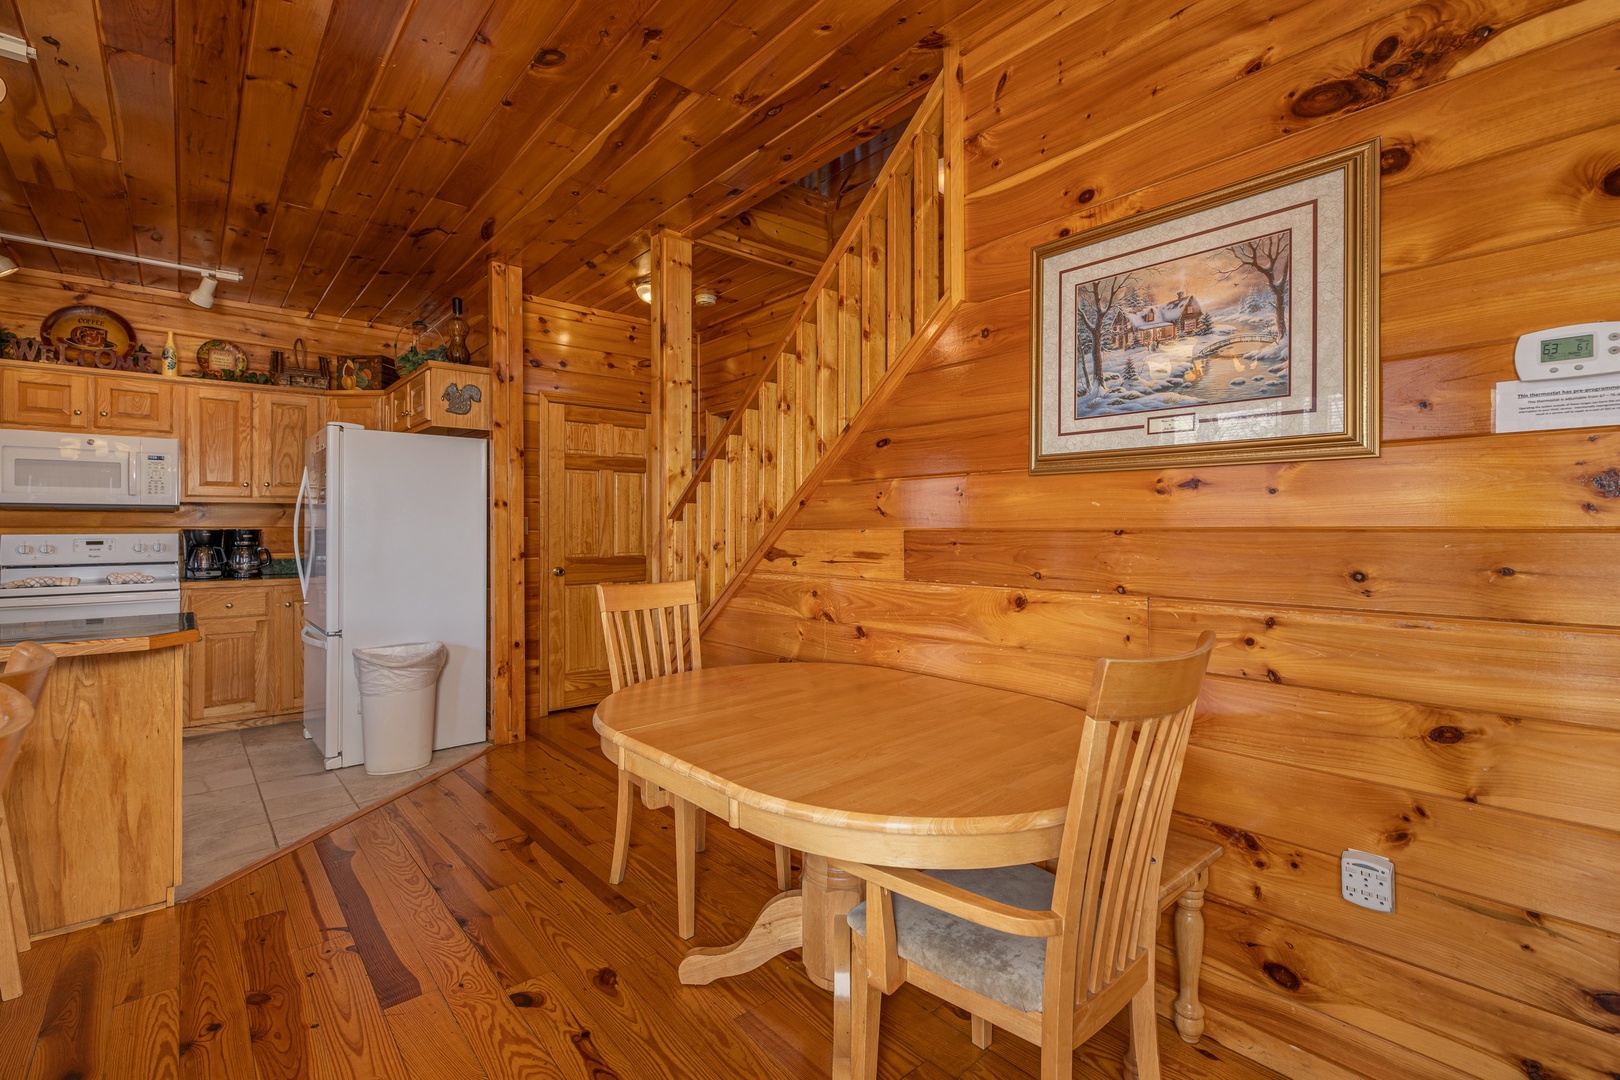 Dining table for two at Hickernut Lodge, a 5-bedroom cabin rental located in Pigeon Forge